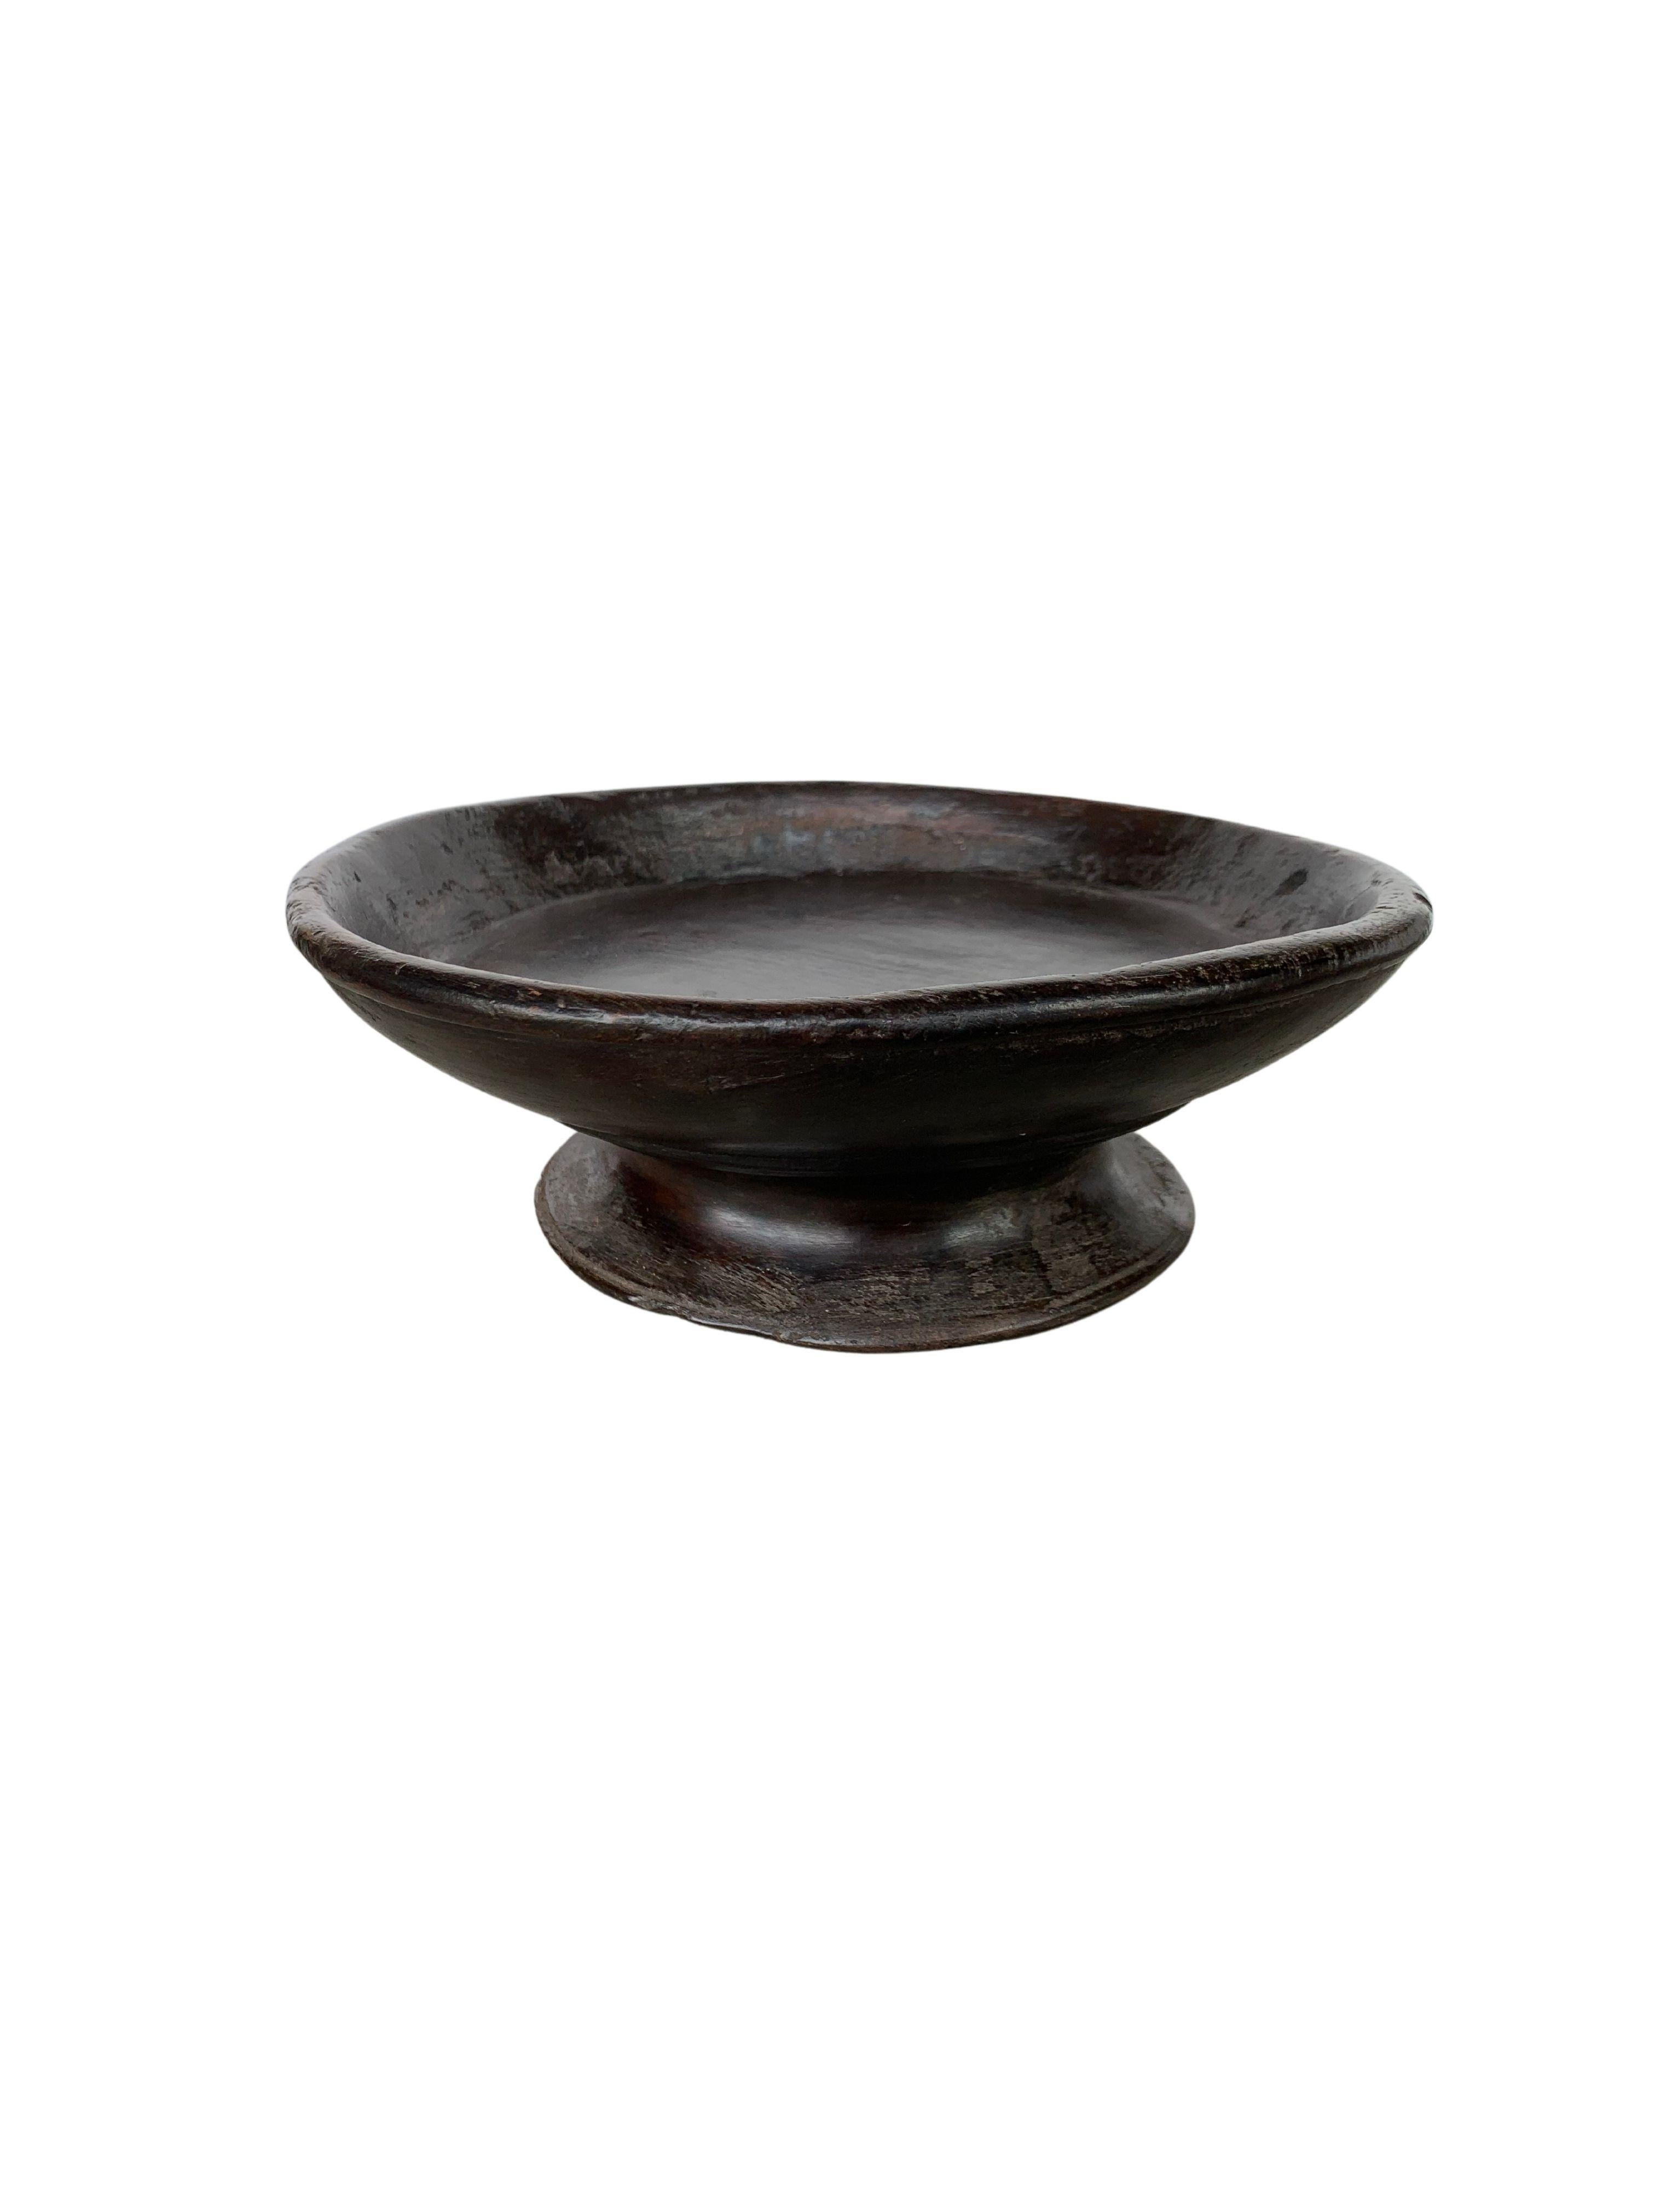 A hand-carved jackfruit wood bowl from Java with subtle carved detailing. Dating to the early 20th century this bowl features a wonderful smooth finish and form. This bowl would have been reserved for displaying and serving food to guests.